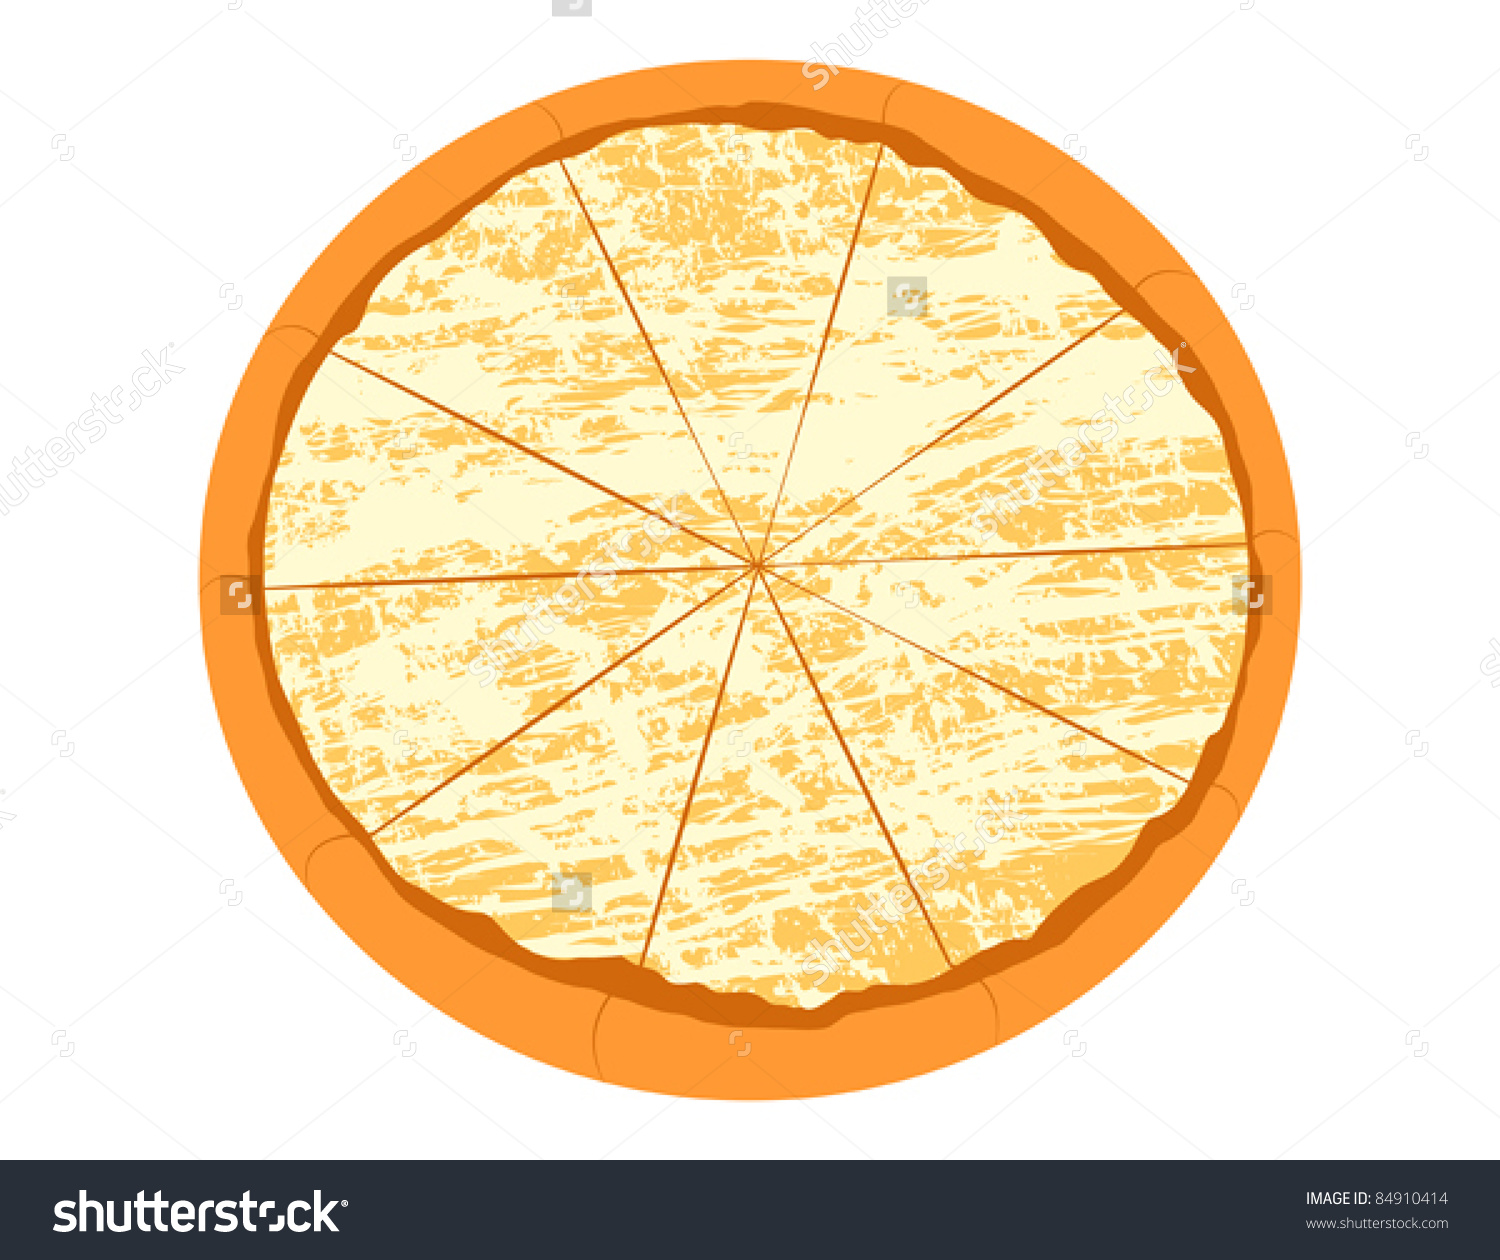 Whole Cheese Pizza